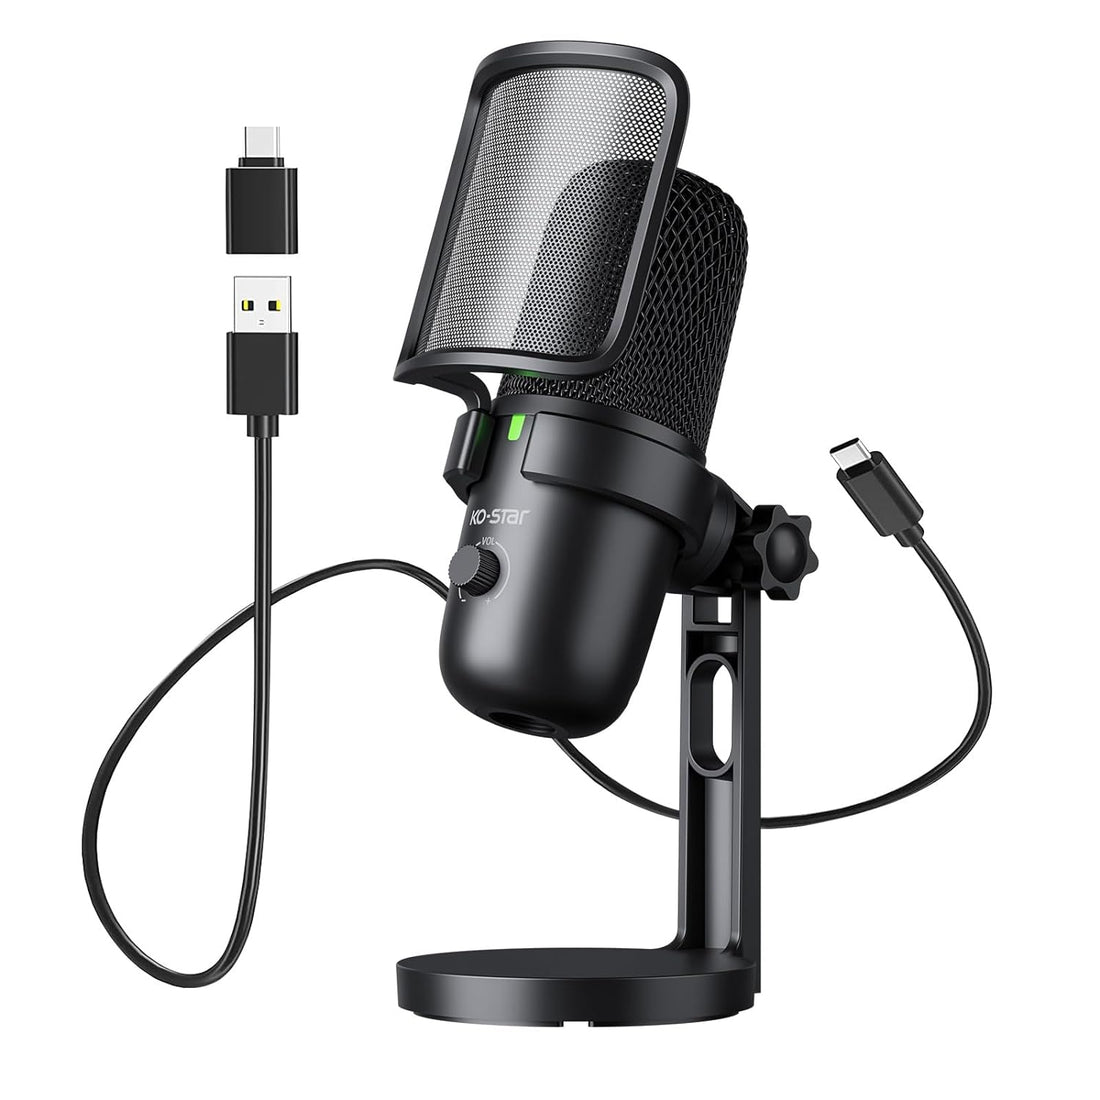 KO-STAR Gaming USB Microphone，PC Computer Mic with 2 Polar Patterns for Podcast Streaming Conference Recording YouTube, Pop Filter,Shock Mount,Gain knob & Monitoring Jack for Twitch, Discord, PS5/PS4